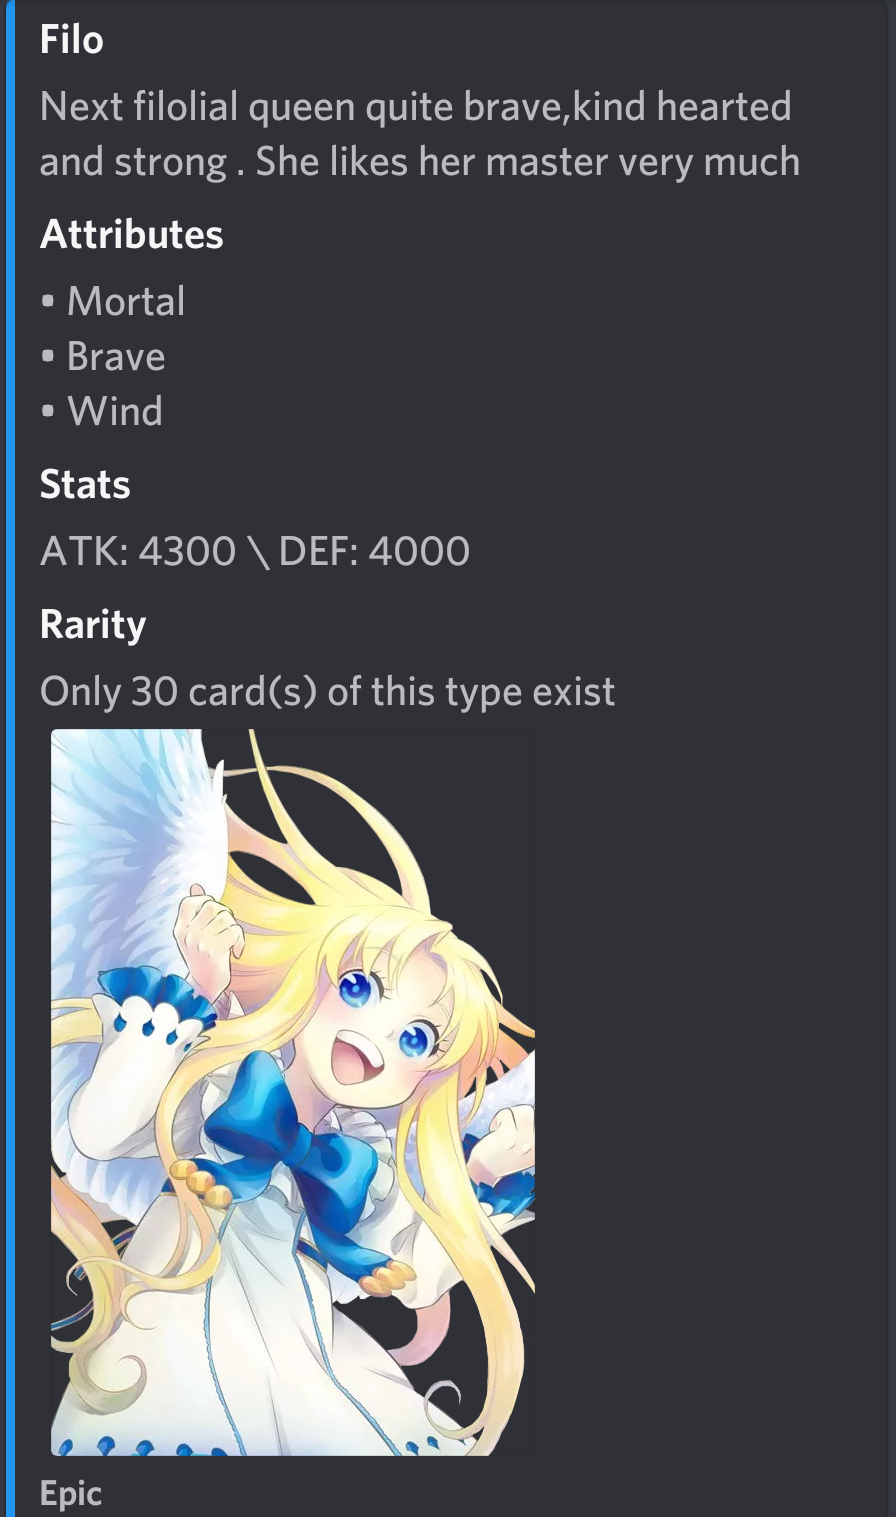 Párrafo Trasplante Se convierte en Discord anime card collecting/dueling bot featuring over 1,000 different  characters (Your beloved Filo included) (link: http://kadobot.xyz) |  Scrolller